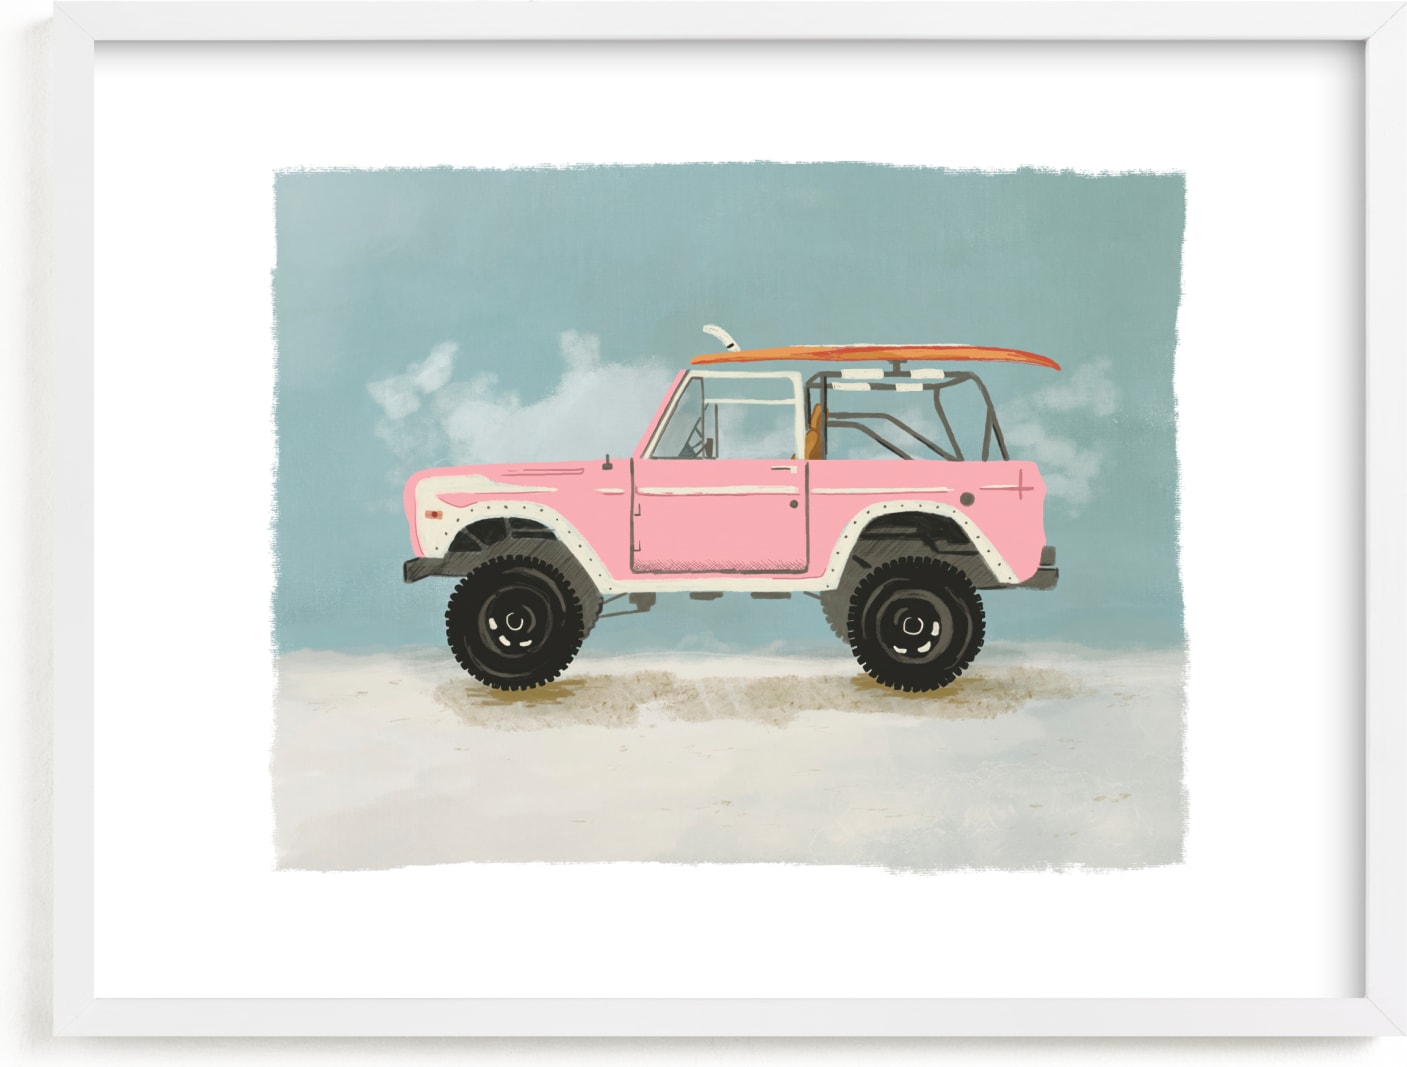 This is a blue, pink art by Erin Kessler called Surf Pink.